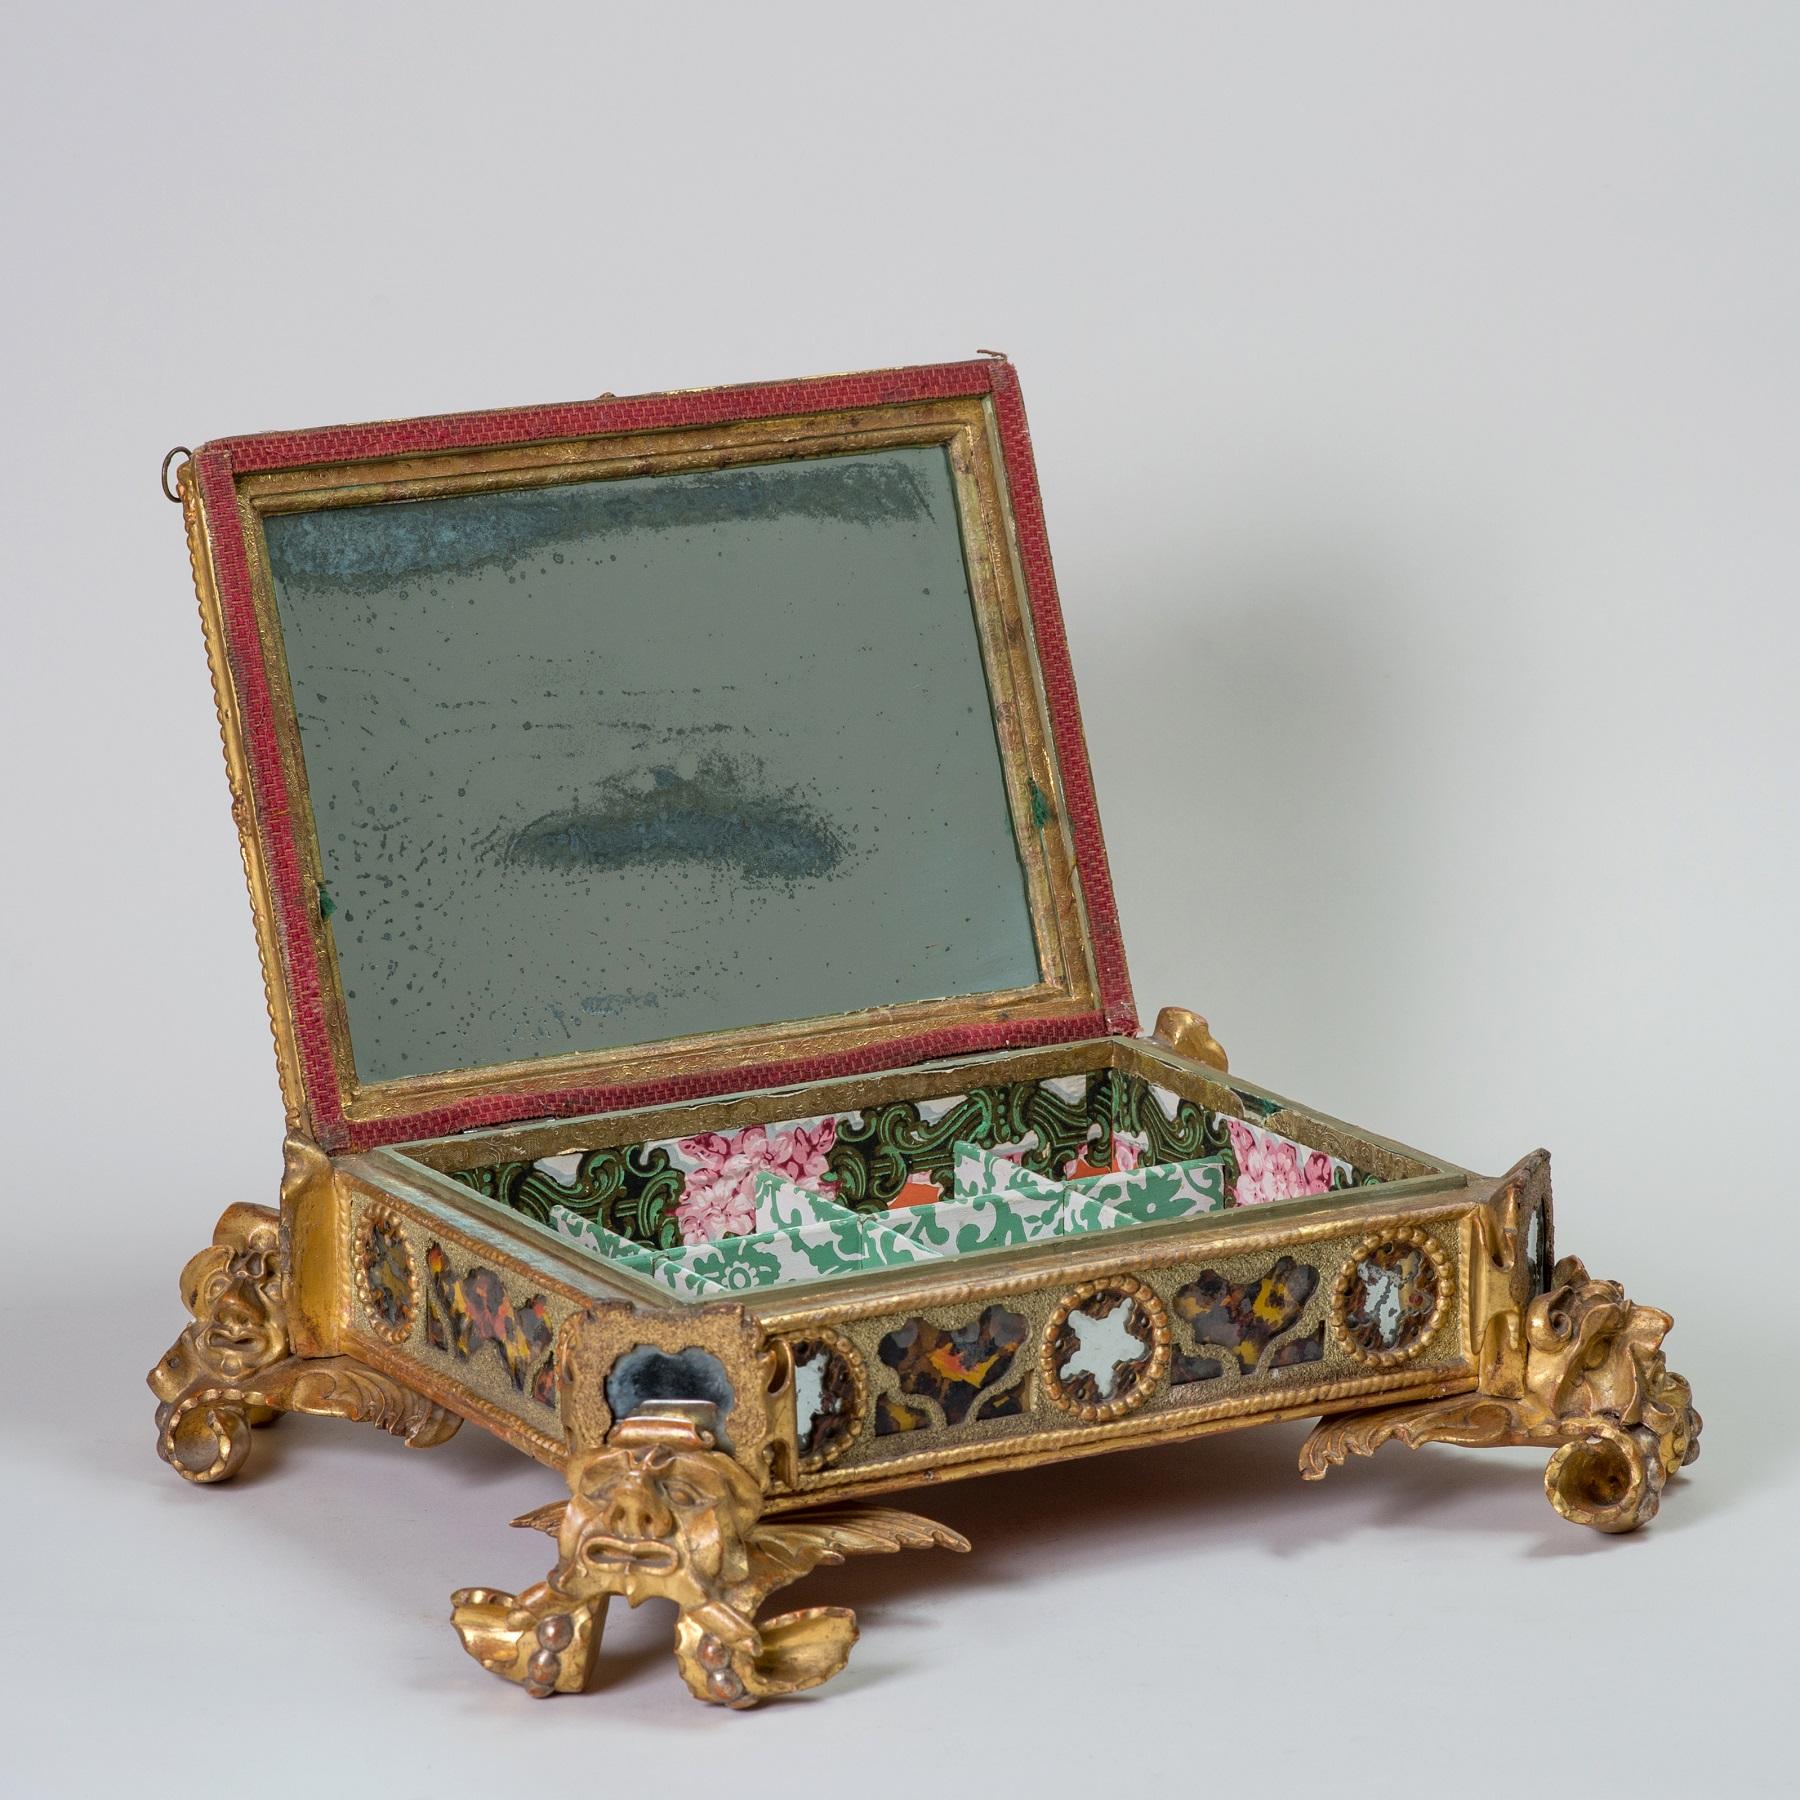 Carved Giltwood, Verre Eglomise, Pastiglia & Crushed Stone Work Casket, C. 1725 In Good Condition For Sale In London, GB